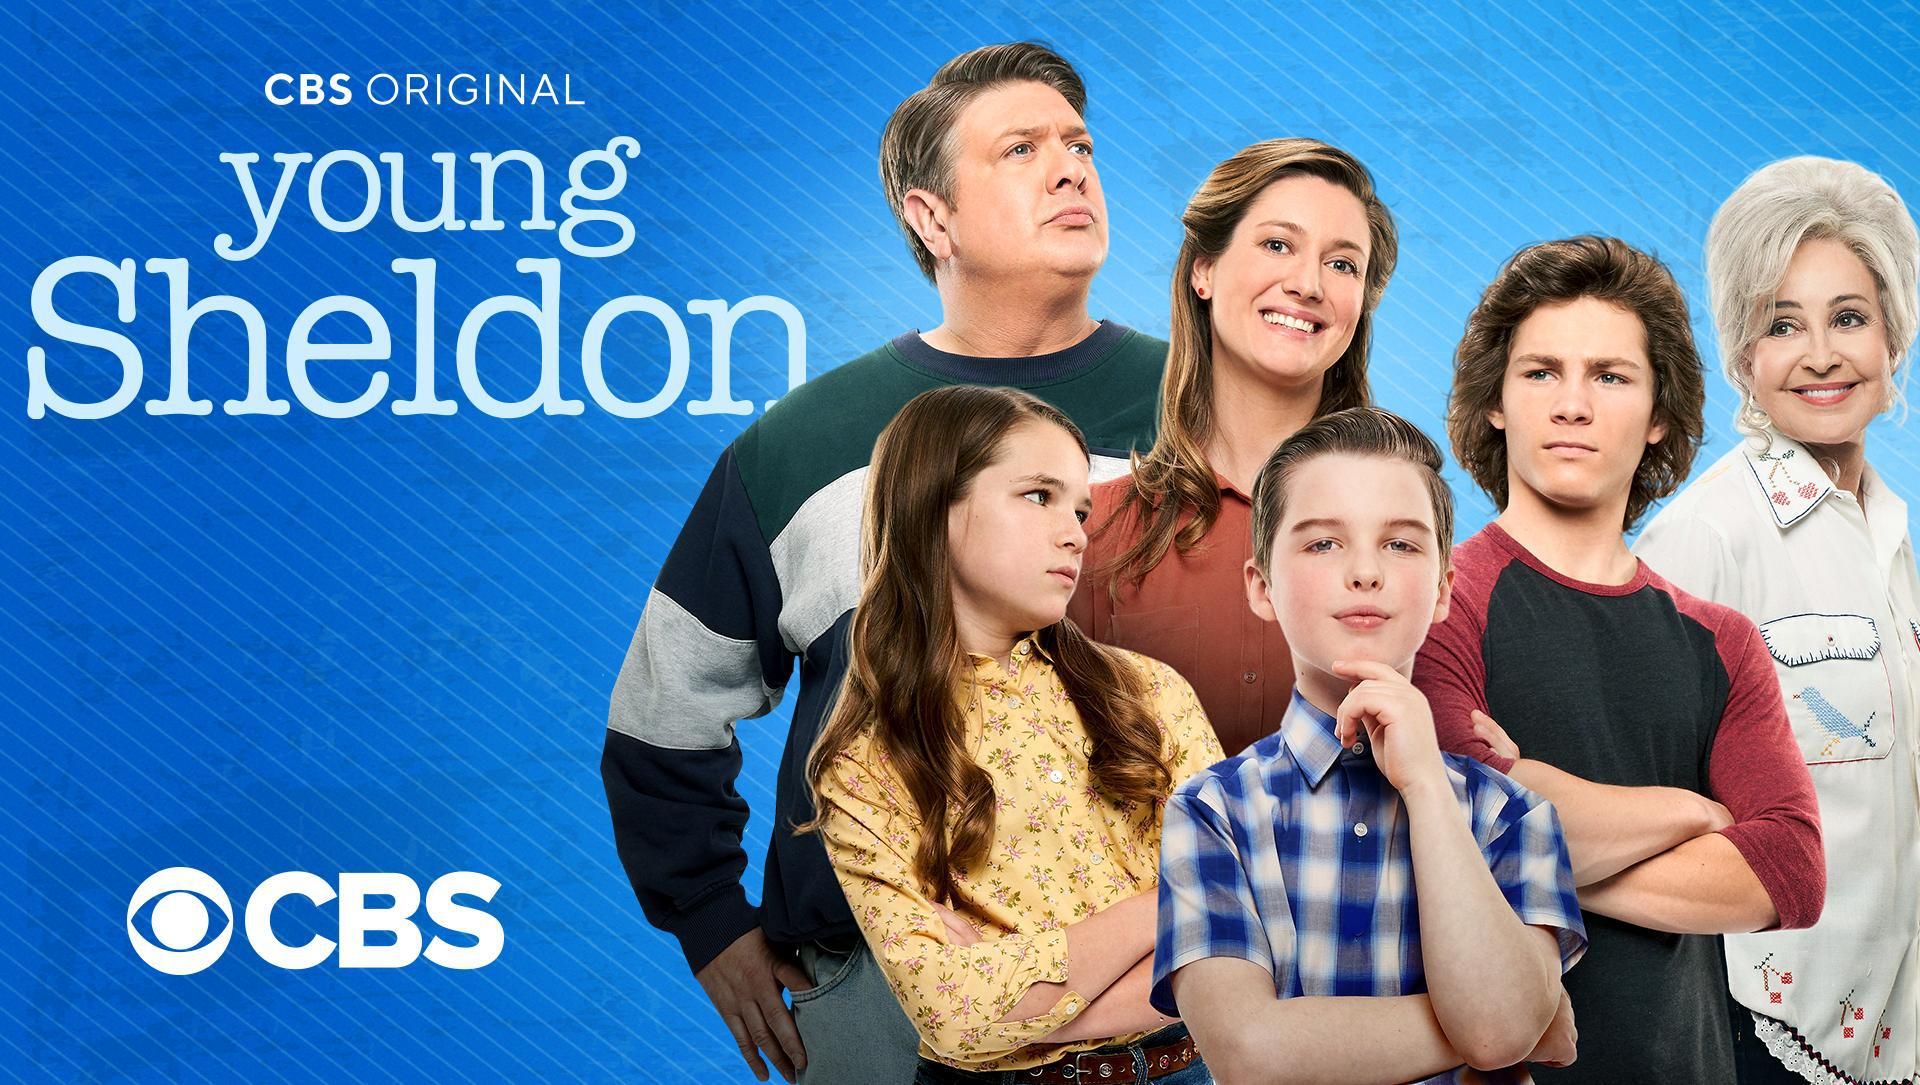 A promotional graphic with the cast of Young Sheldon against a blue background